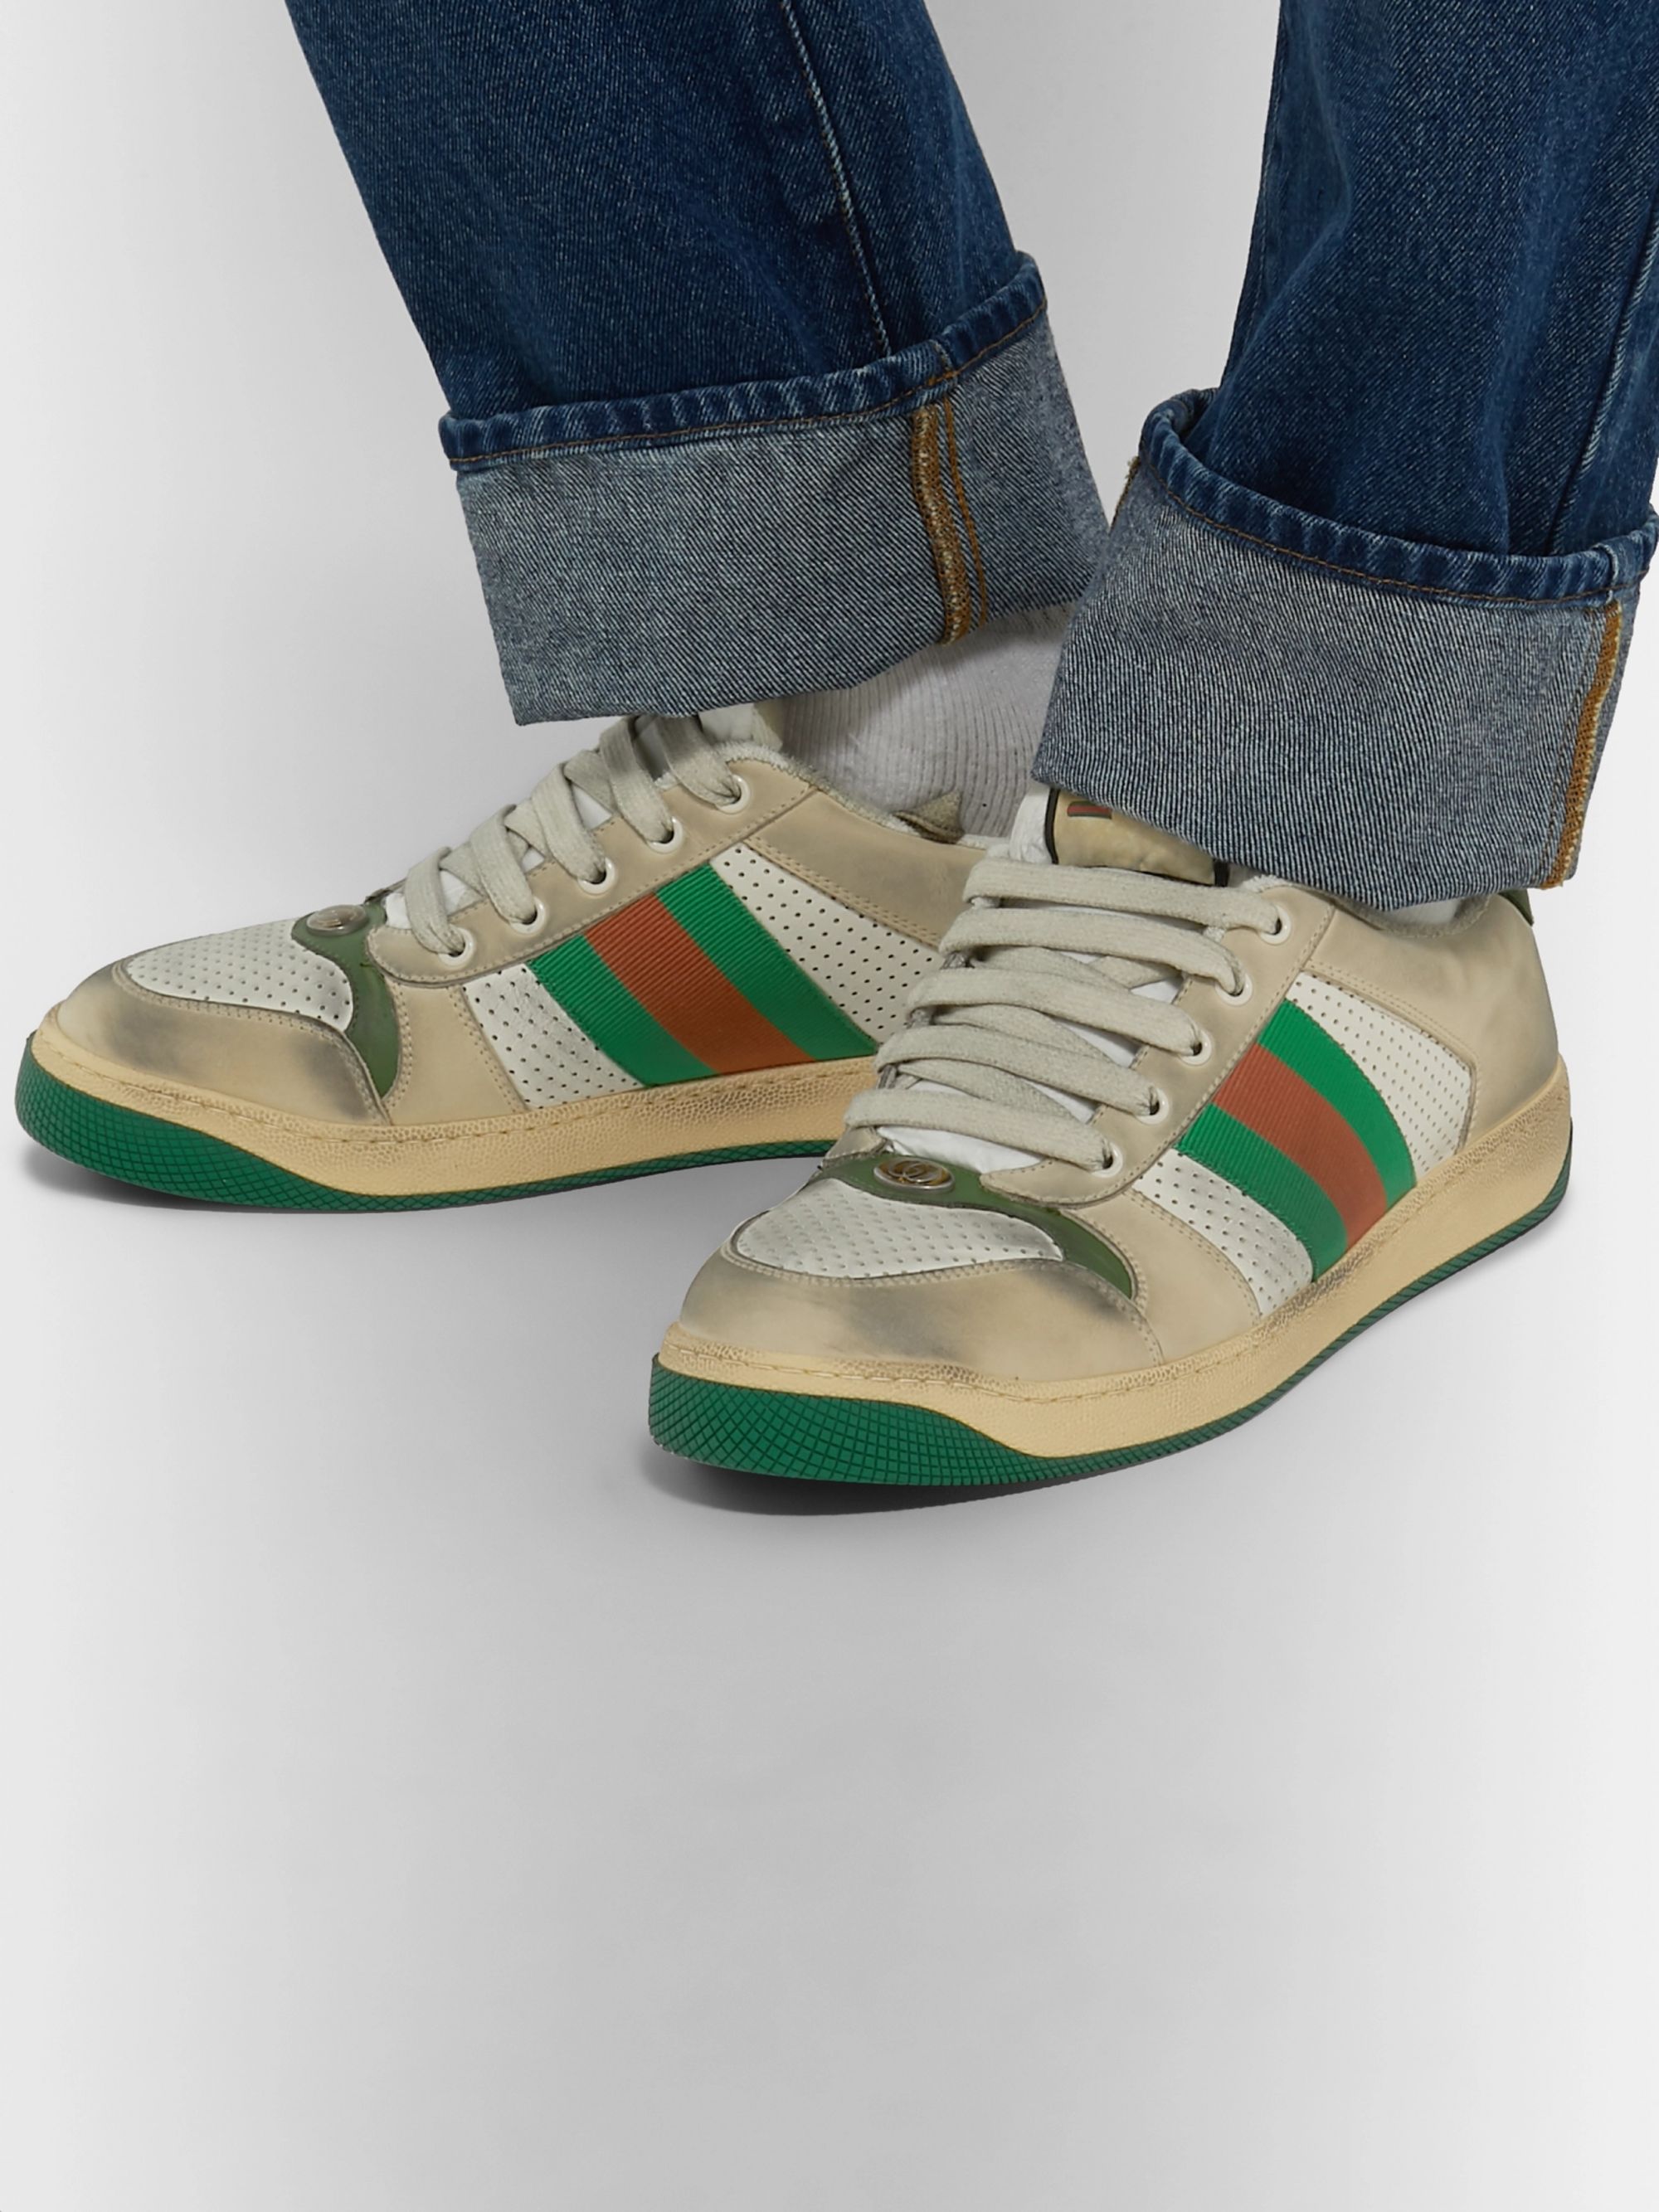 gucci skate shoes, OFF 70%,www 